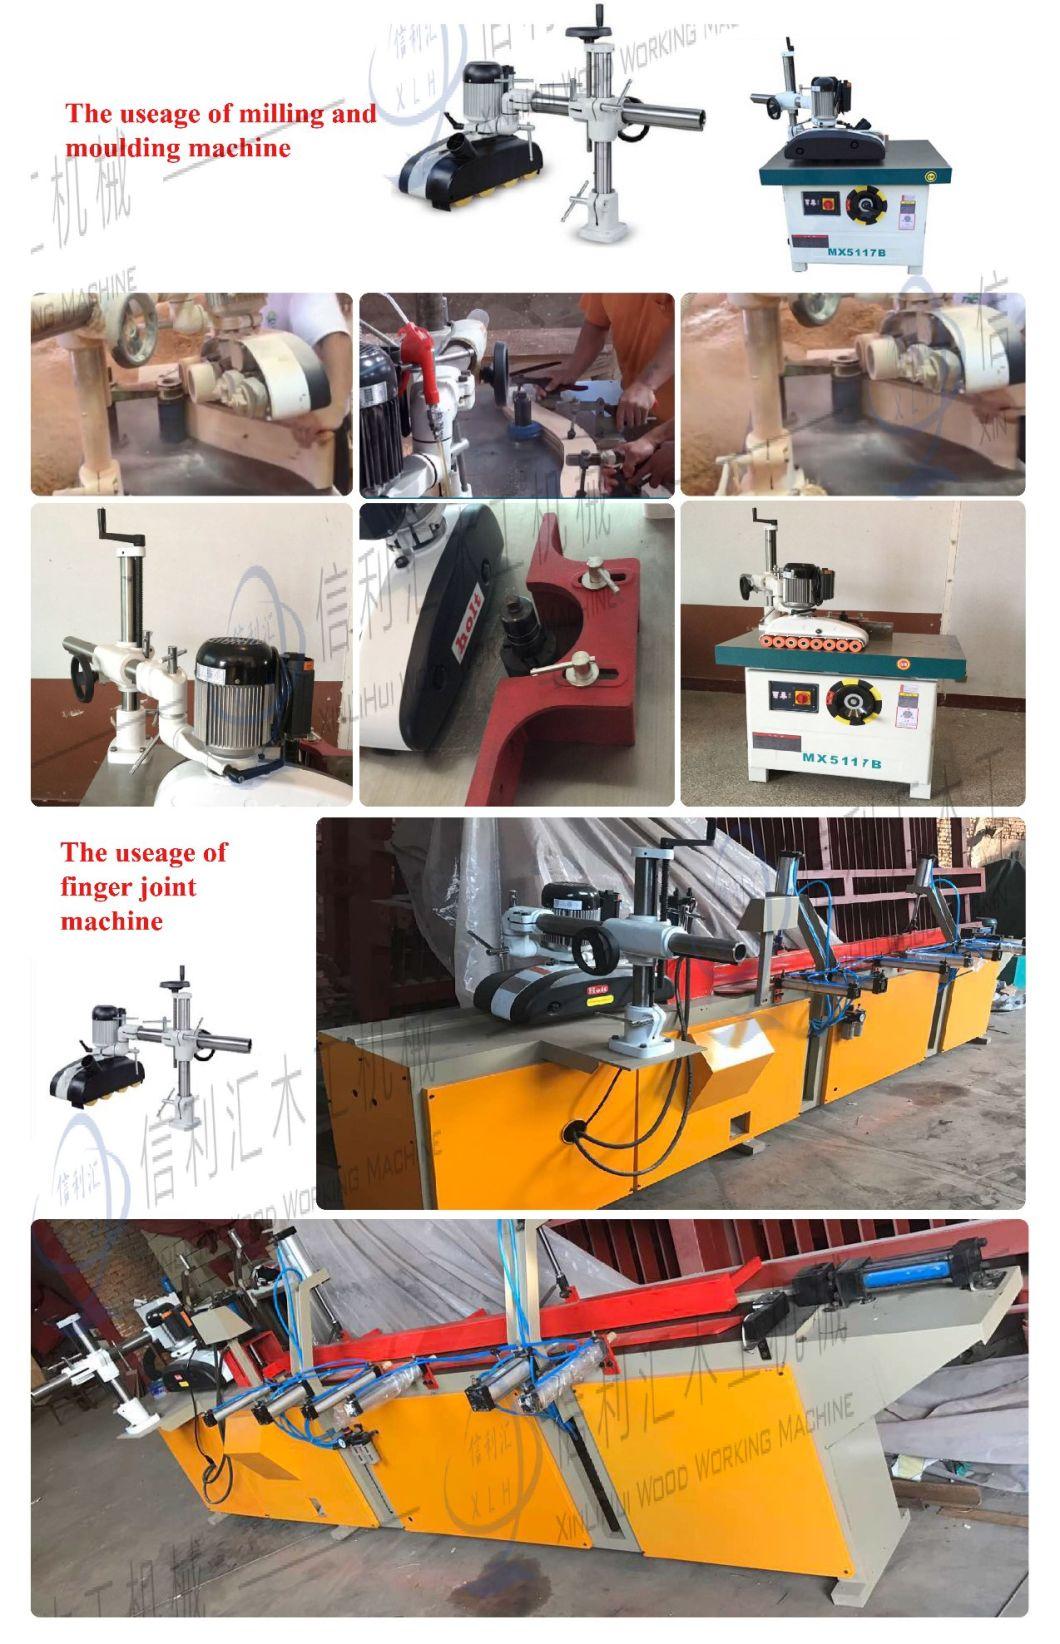 Heavy Duty Power Feeder for Woodworking for Spindle Moulder/ 4 Roller 8 Speed Woodworking Machine Heavy Ring Power Feeder/ Feeder Shaper in Router Machine